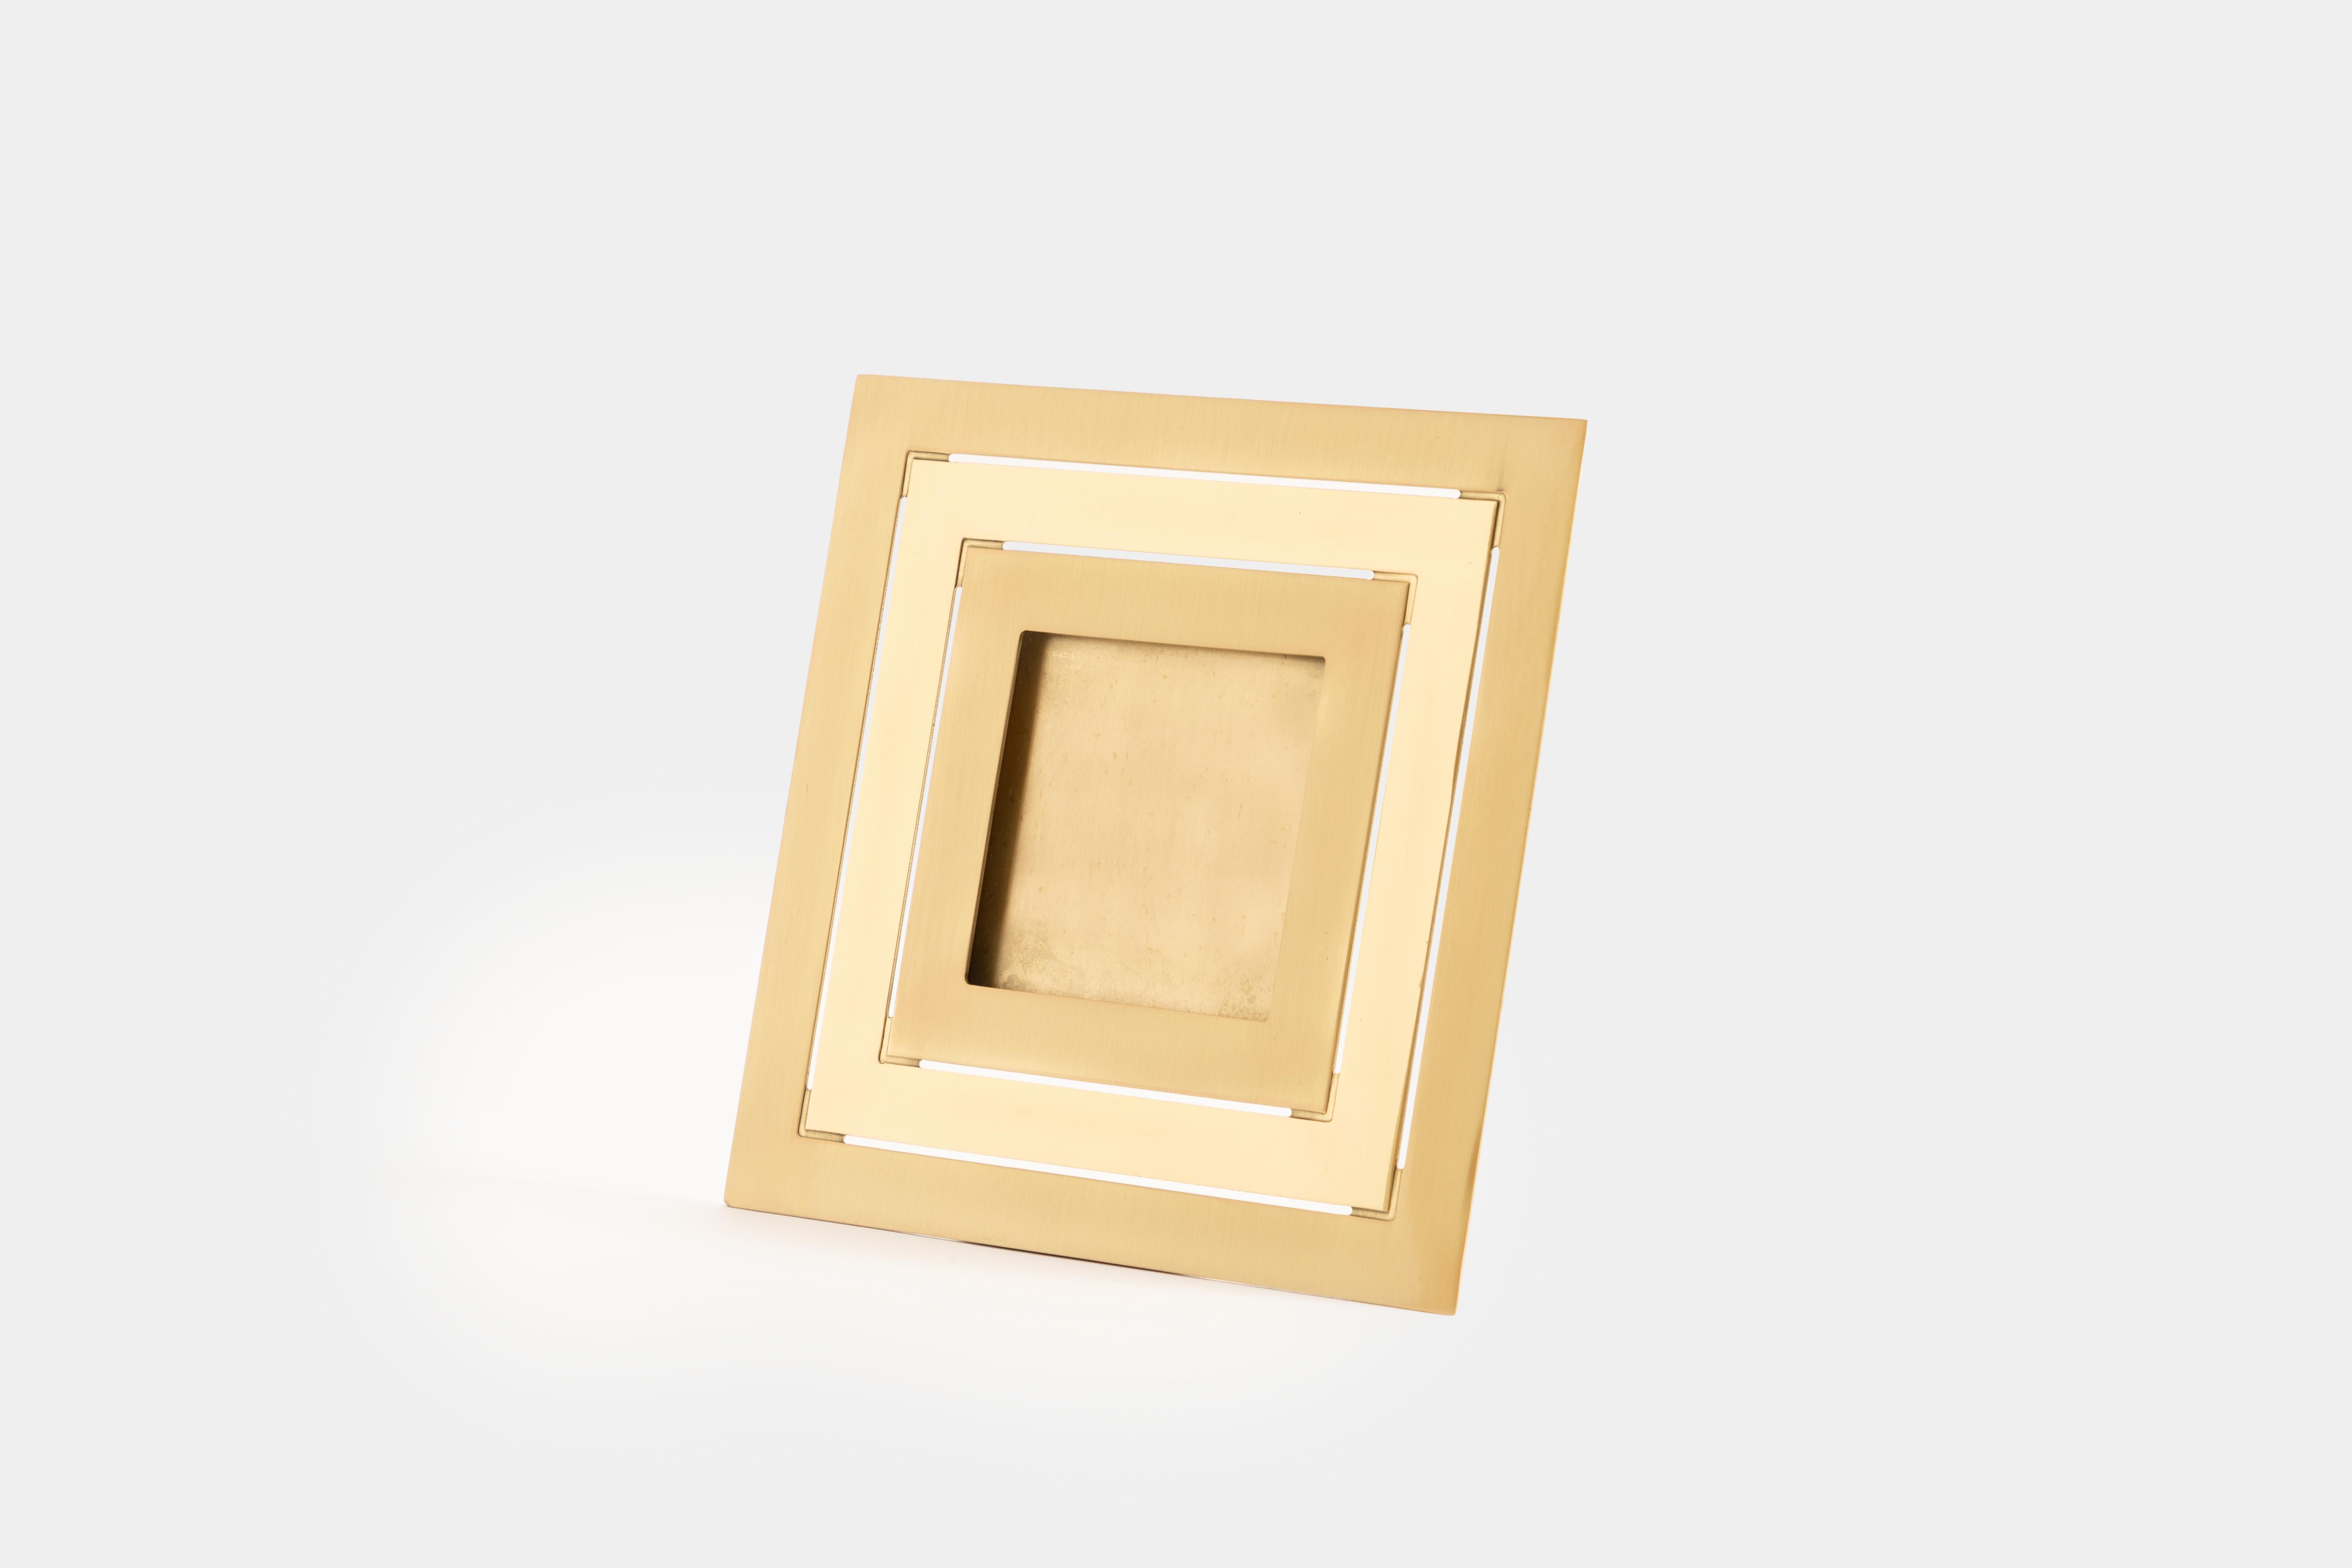 Gabriella Crespi square picture frame with alternating bands of brushed and polished brass, Italy, 1973.
Signed to reverse 